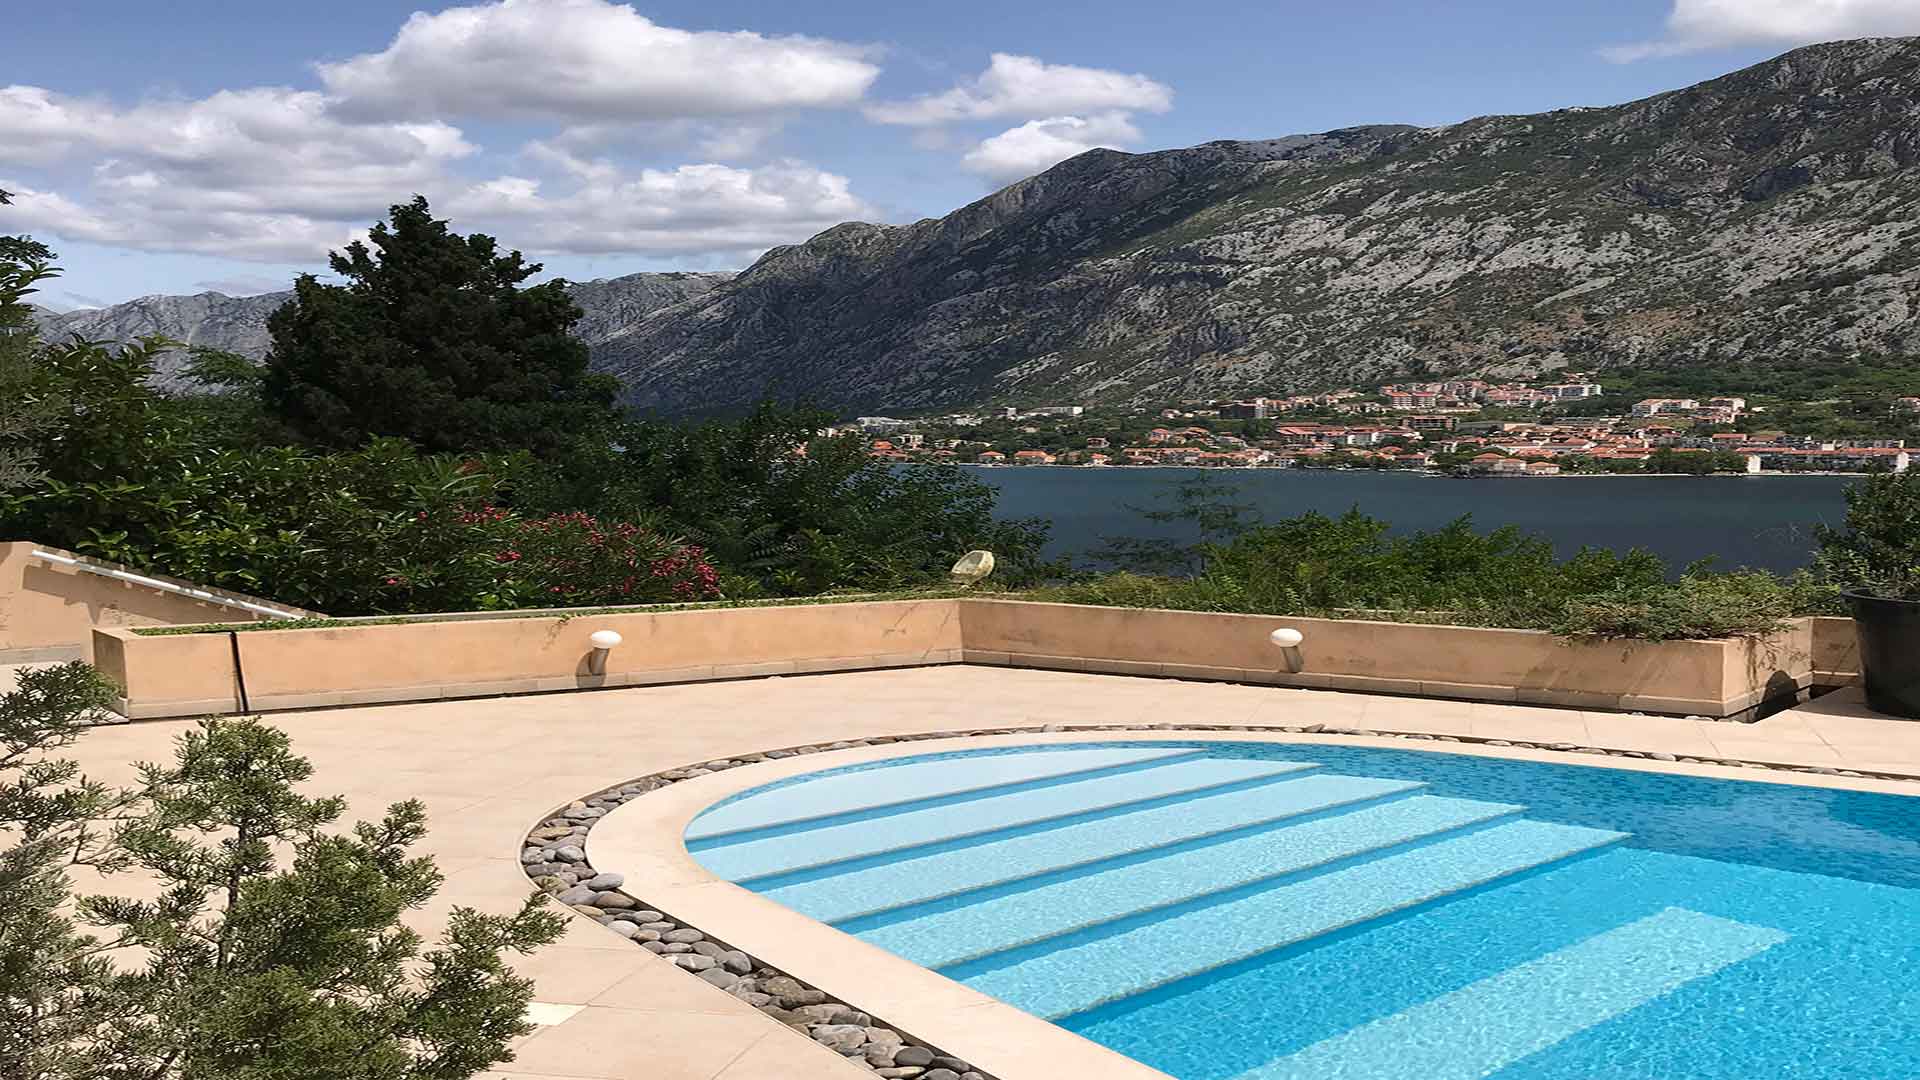 Apartment-for-sale-Muo-Kotor-19-1